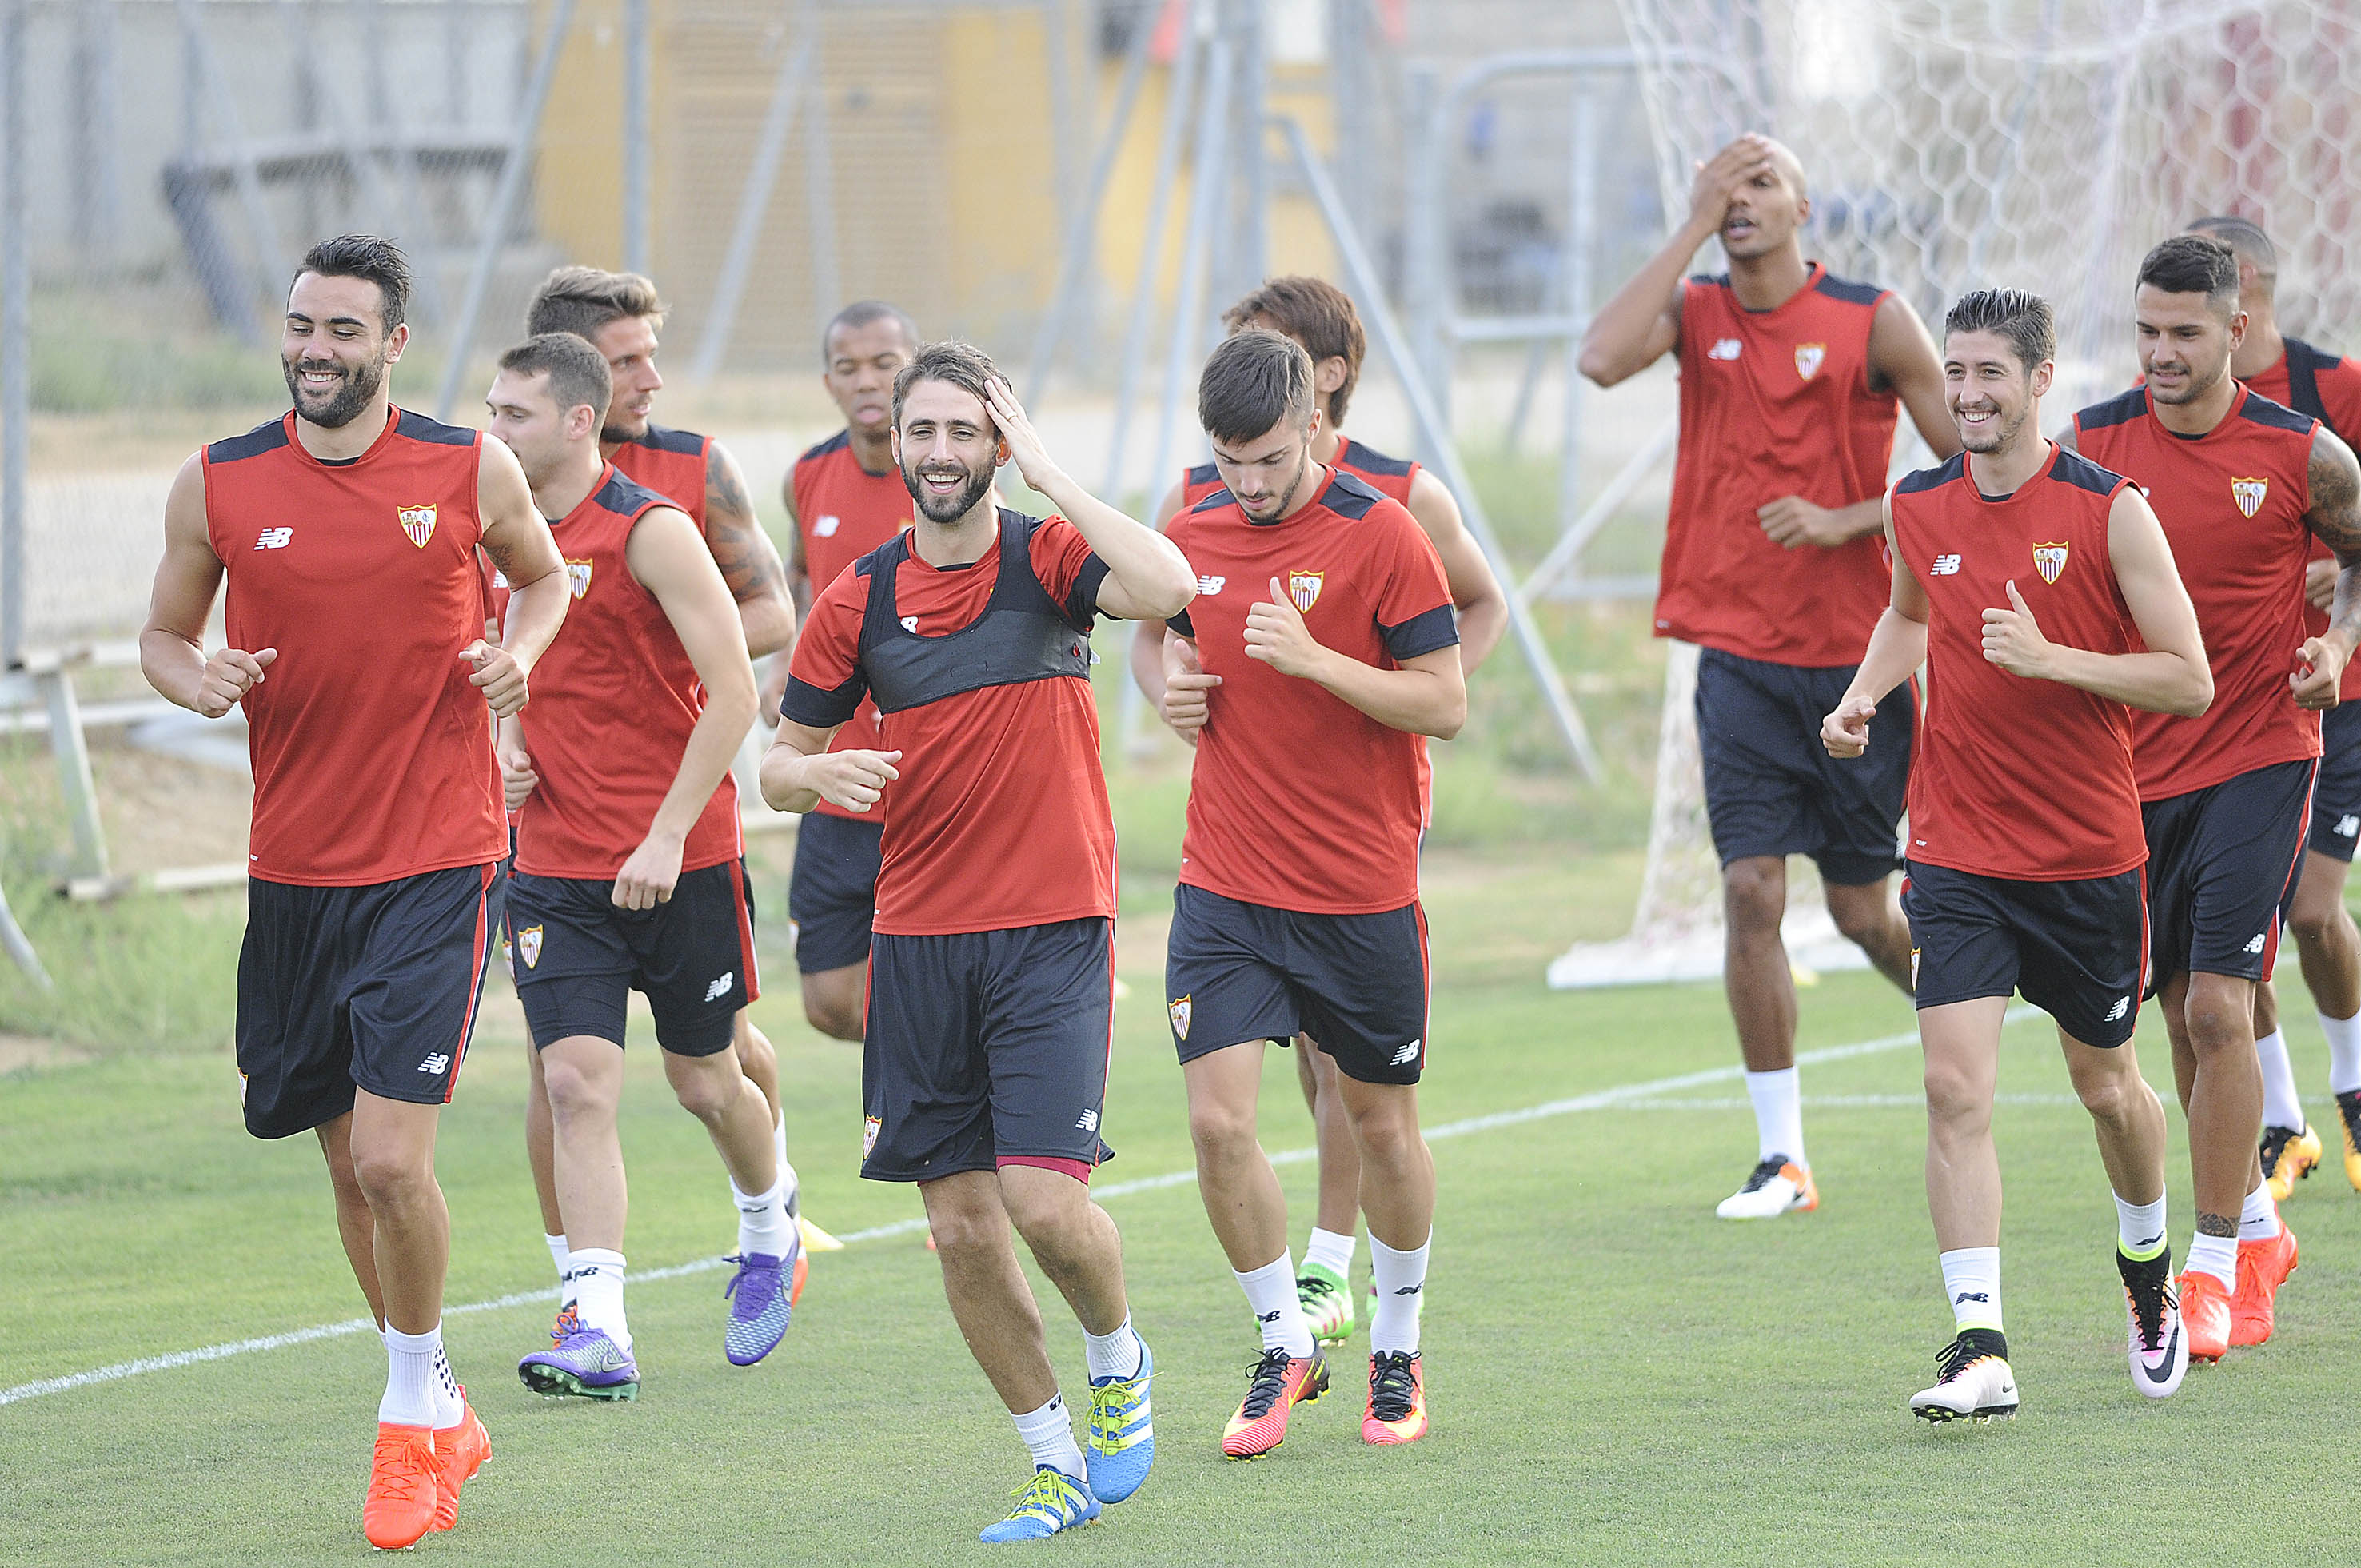 The squad during a training session at the Ciudad Deportiva